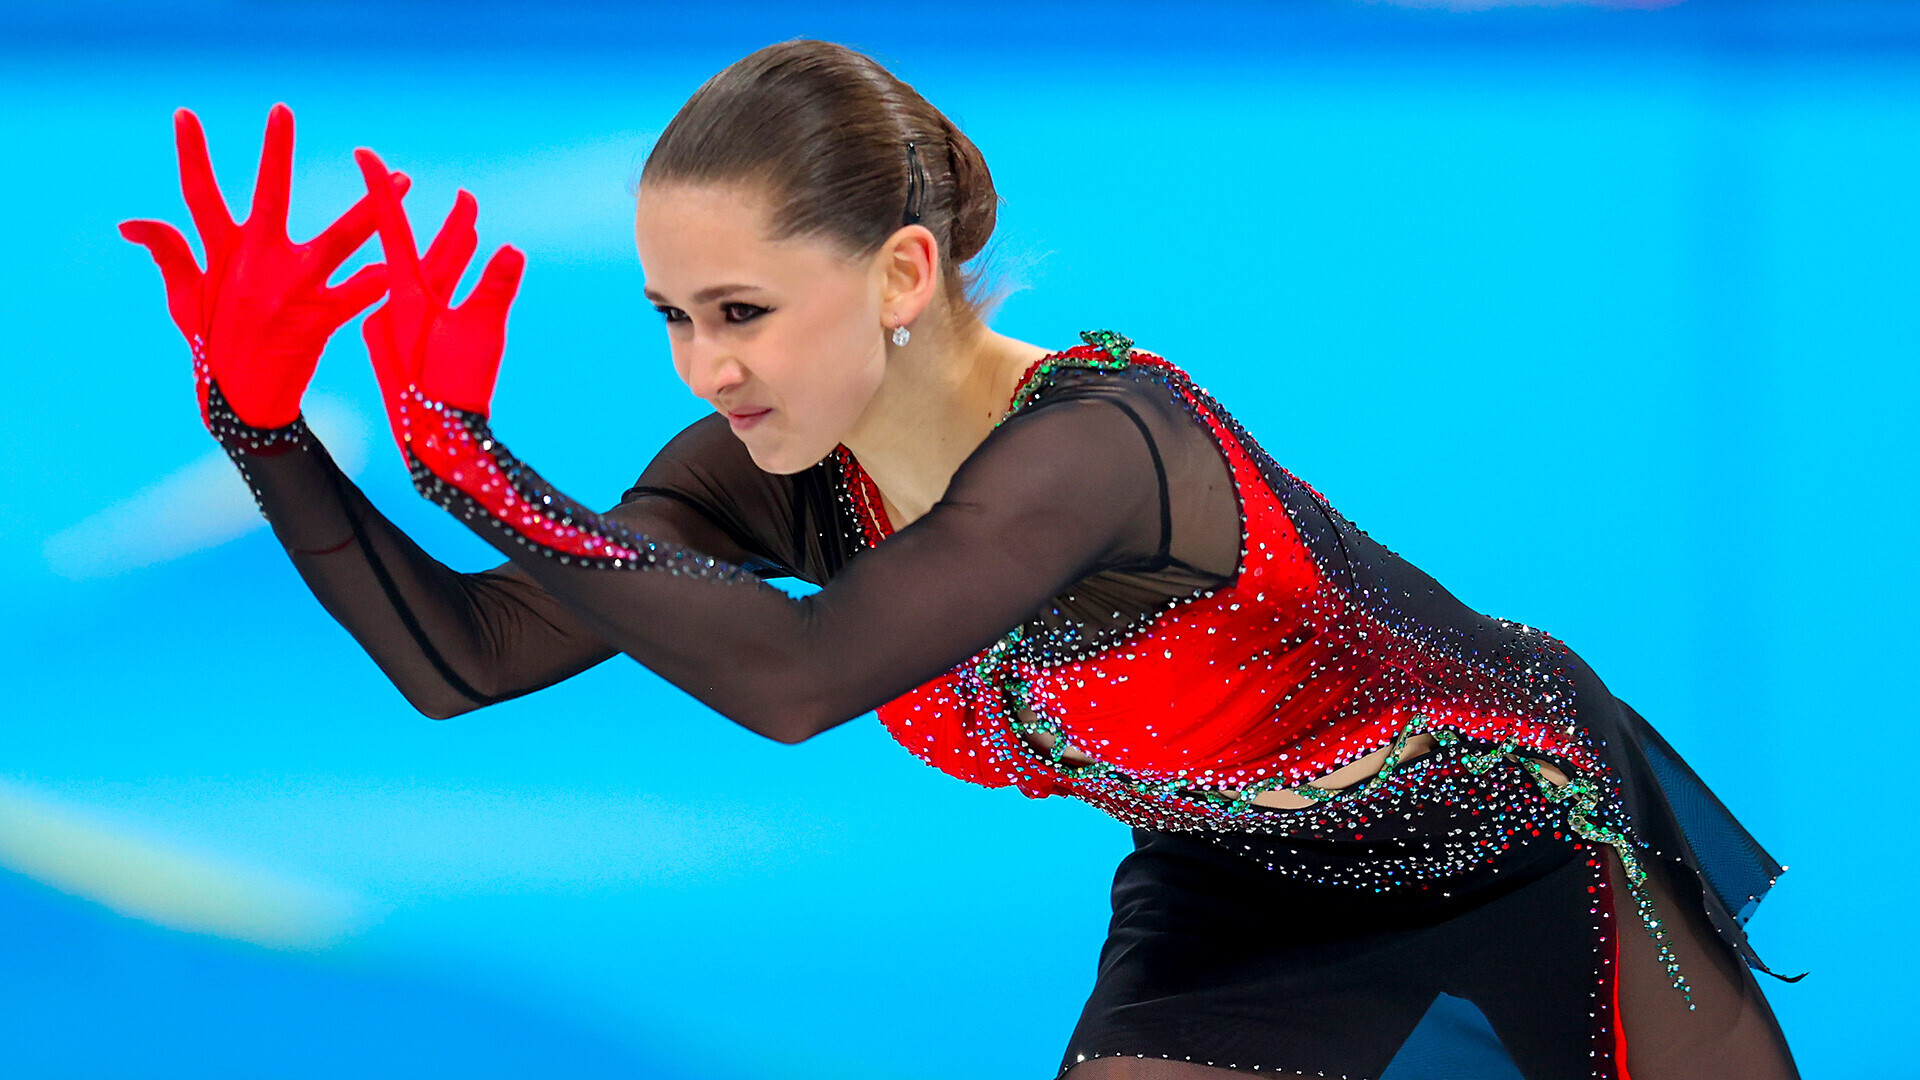 Kamila Valieva skates during the team event at the Beijing 2022 Winter Olympic Games

